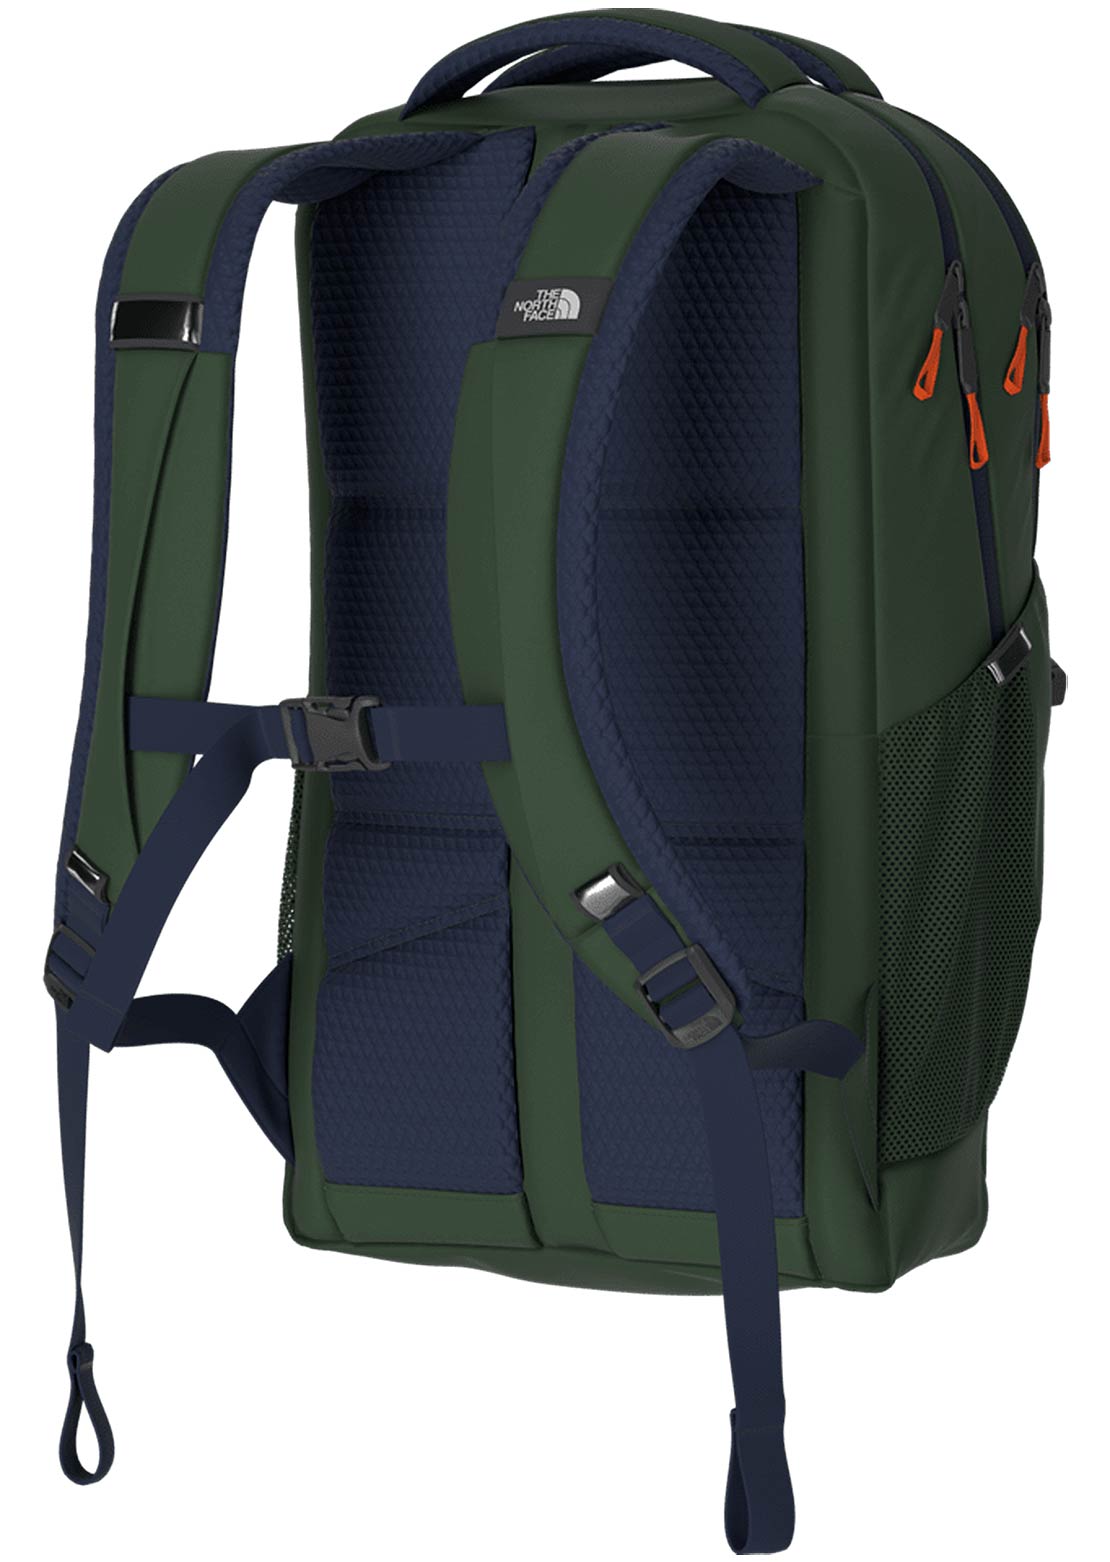 The North Face Jester Backpack Pine Needle/Summit Navy/Power Orange